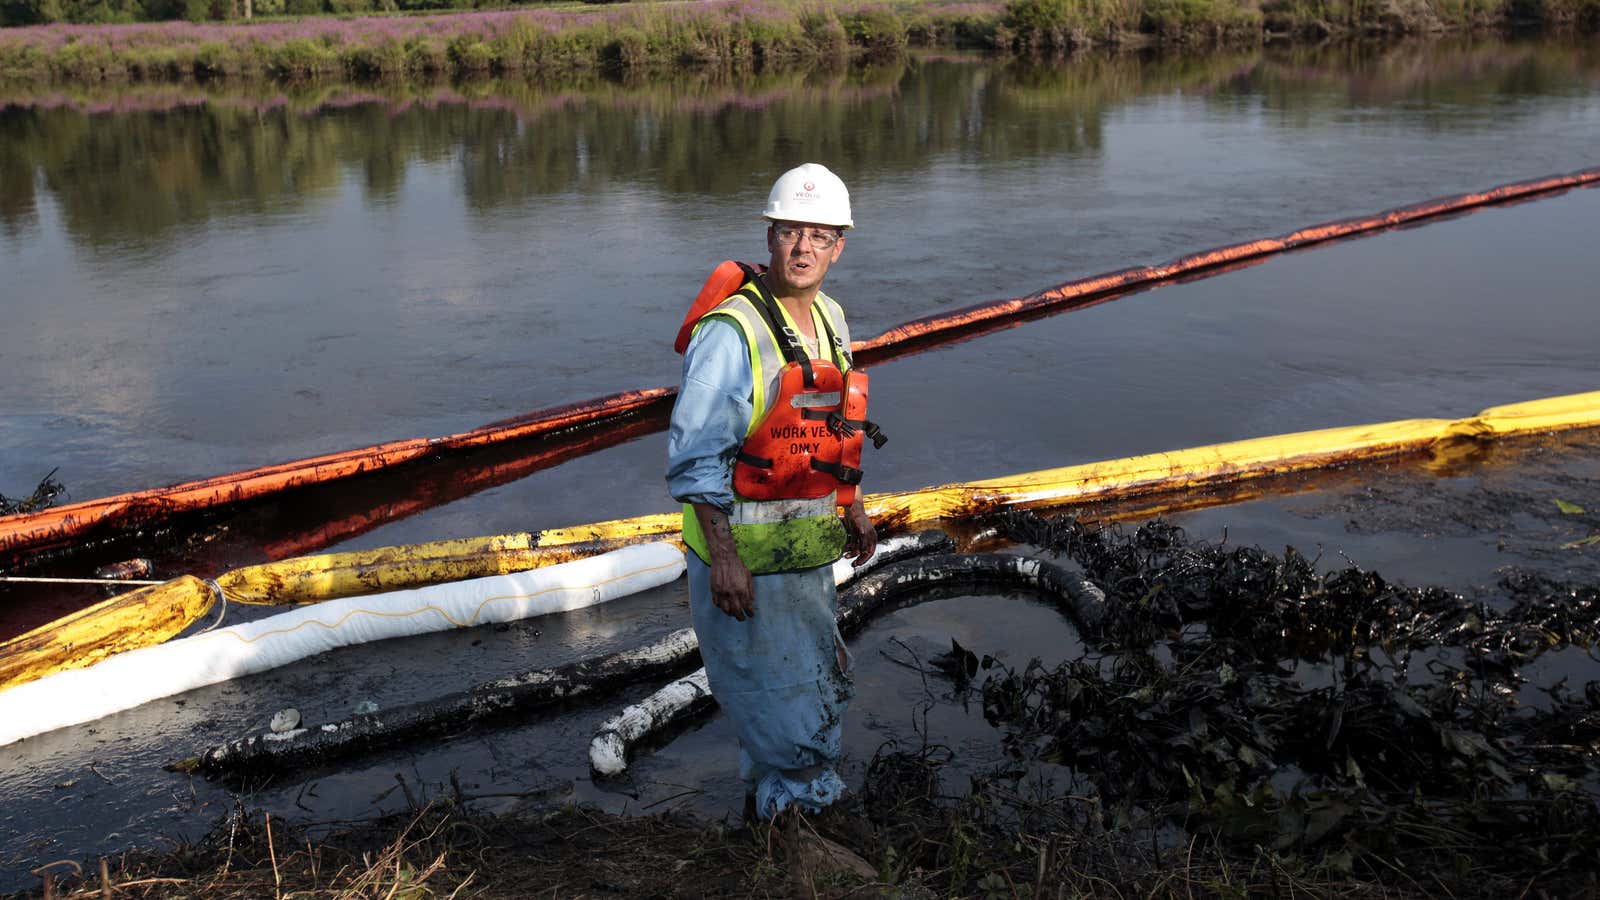 There’s not enough manpower to catch every pipeline problem in the US.